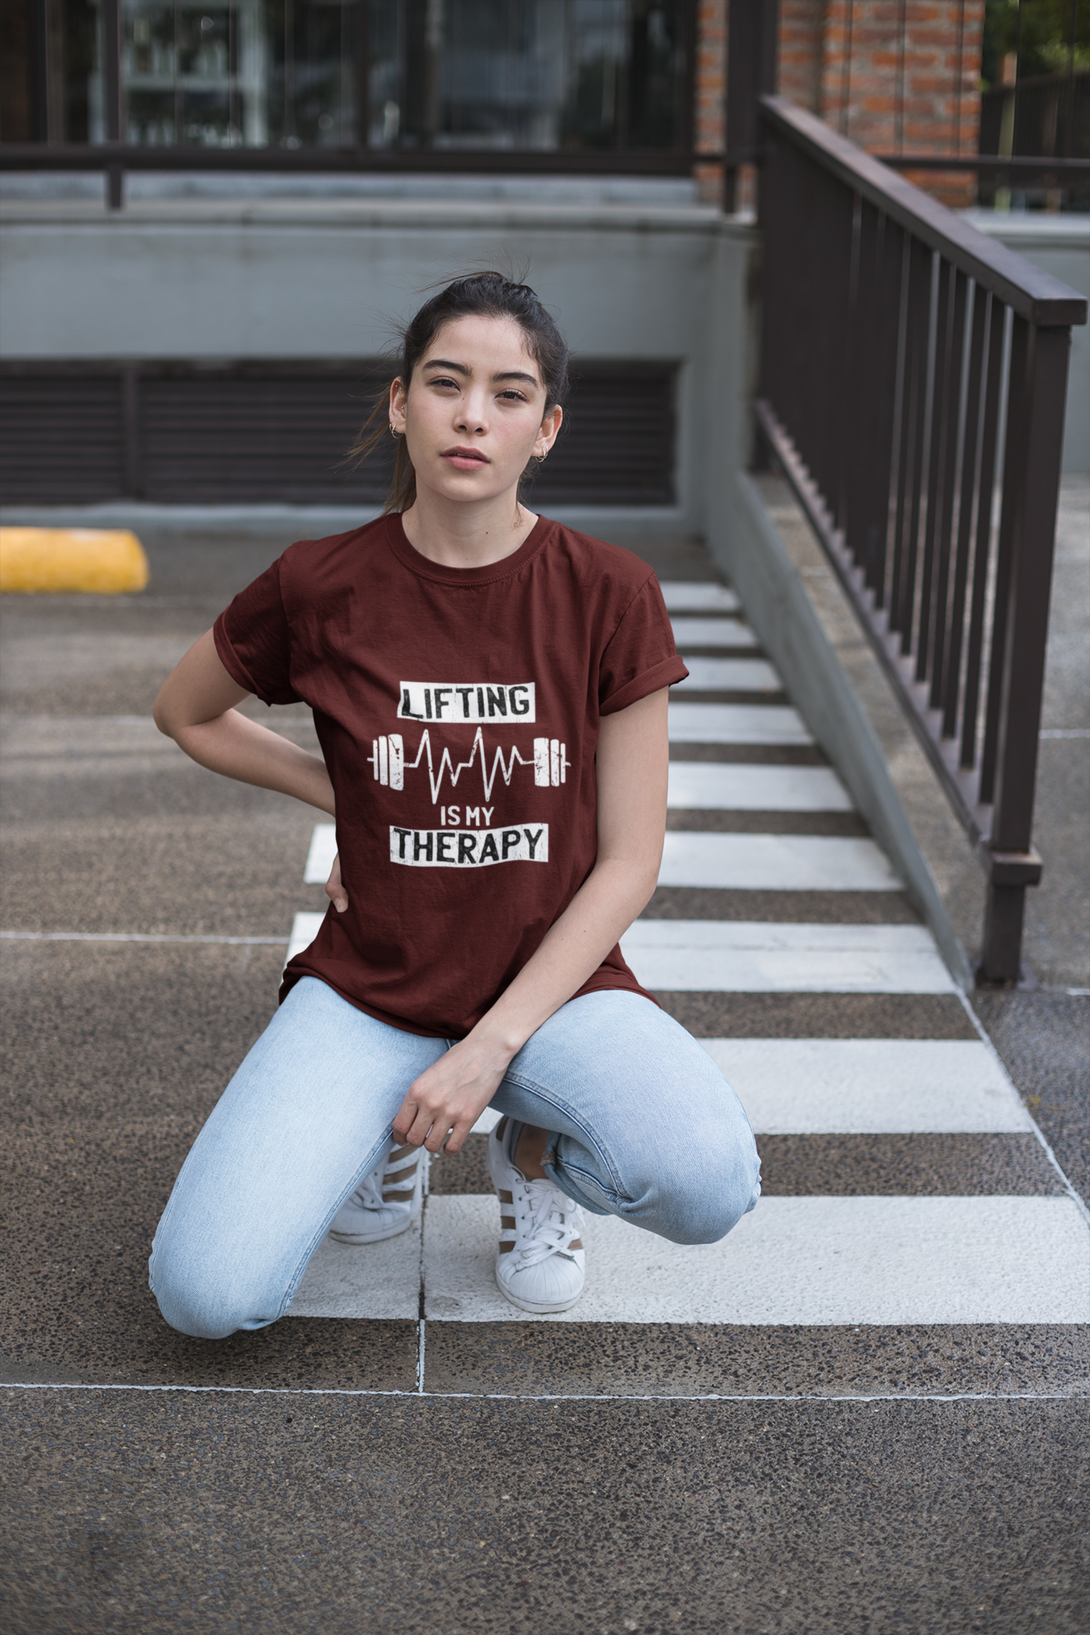 Weightlifting Therapy Printed Oversized T-Shirt For Women - WowWaves - 3